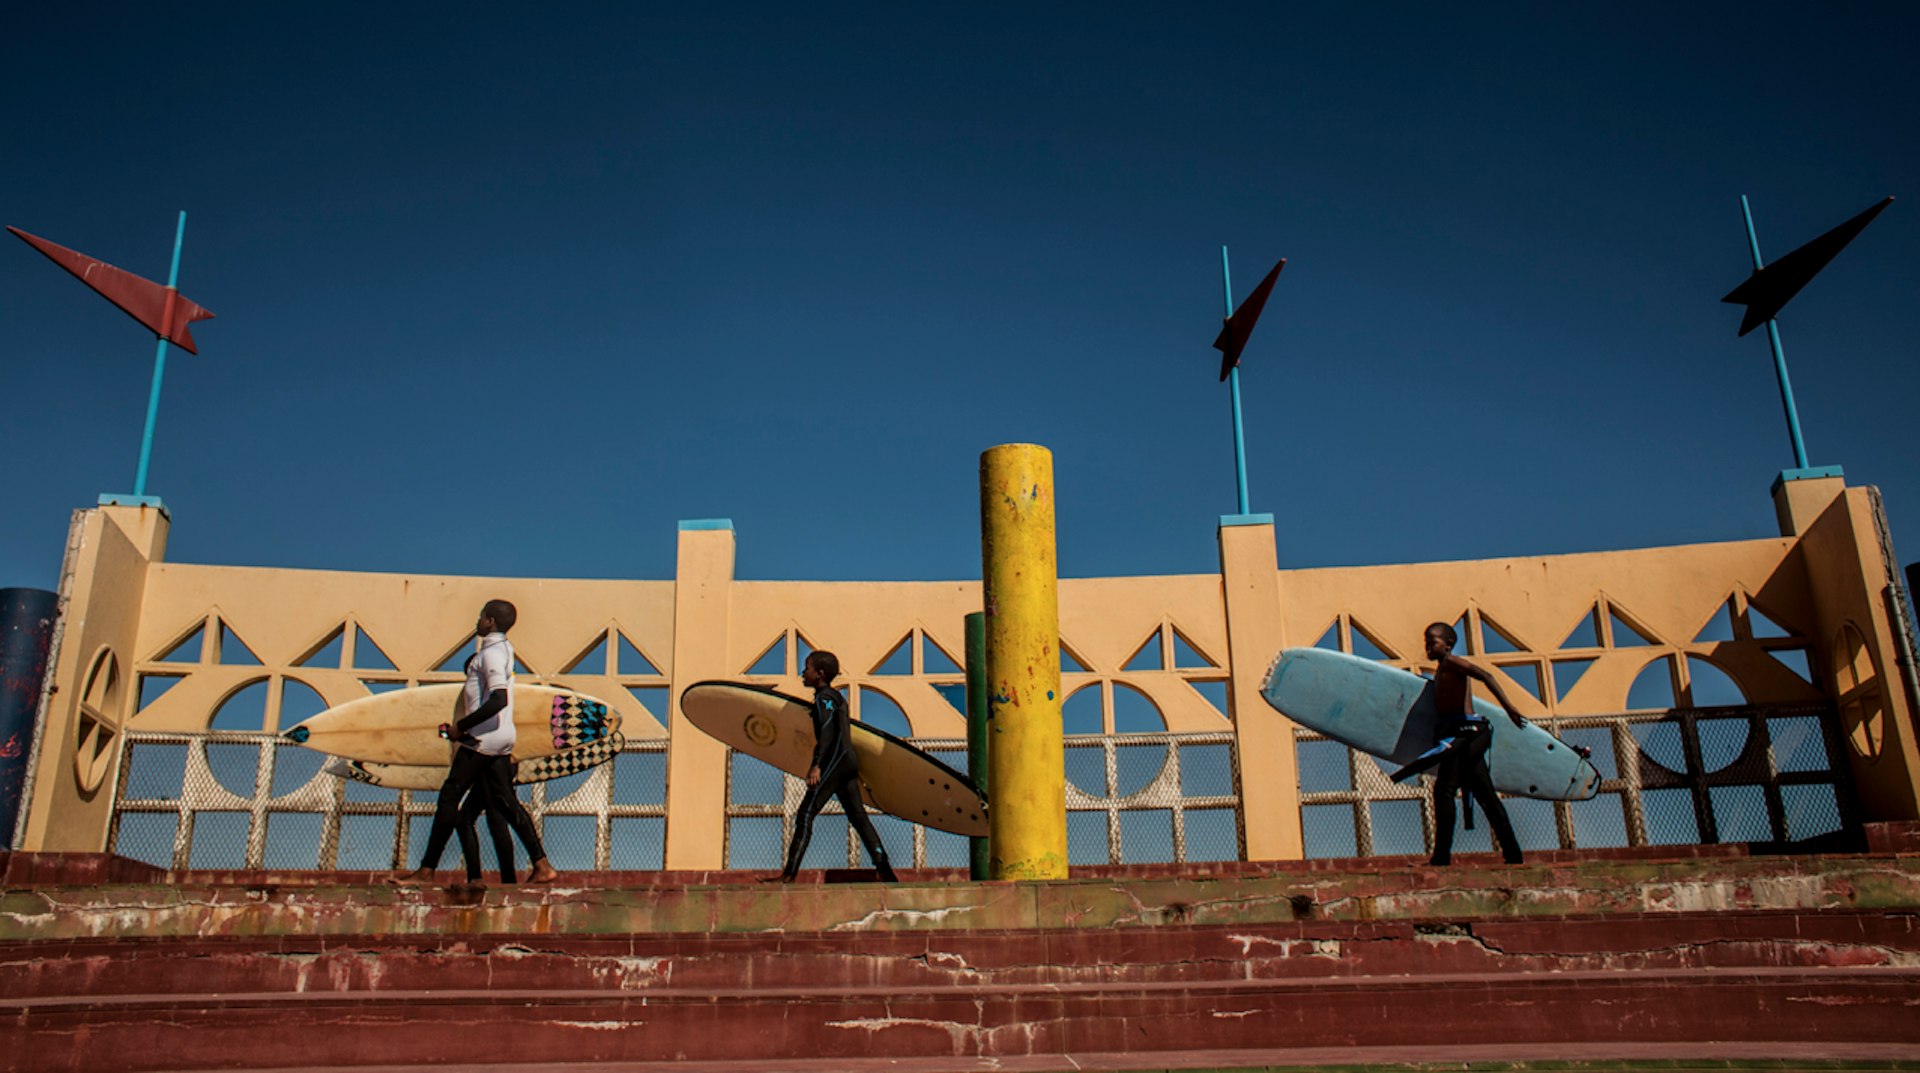 South Africa's township beaches are springing to life with a grassroots surf scene